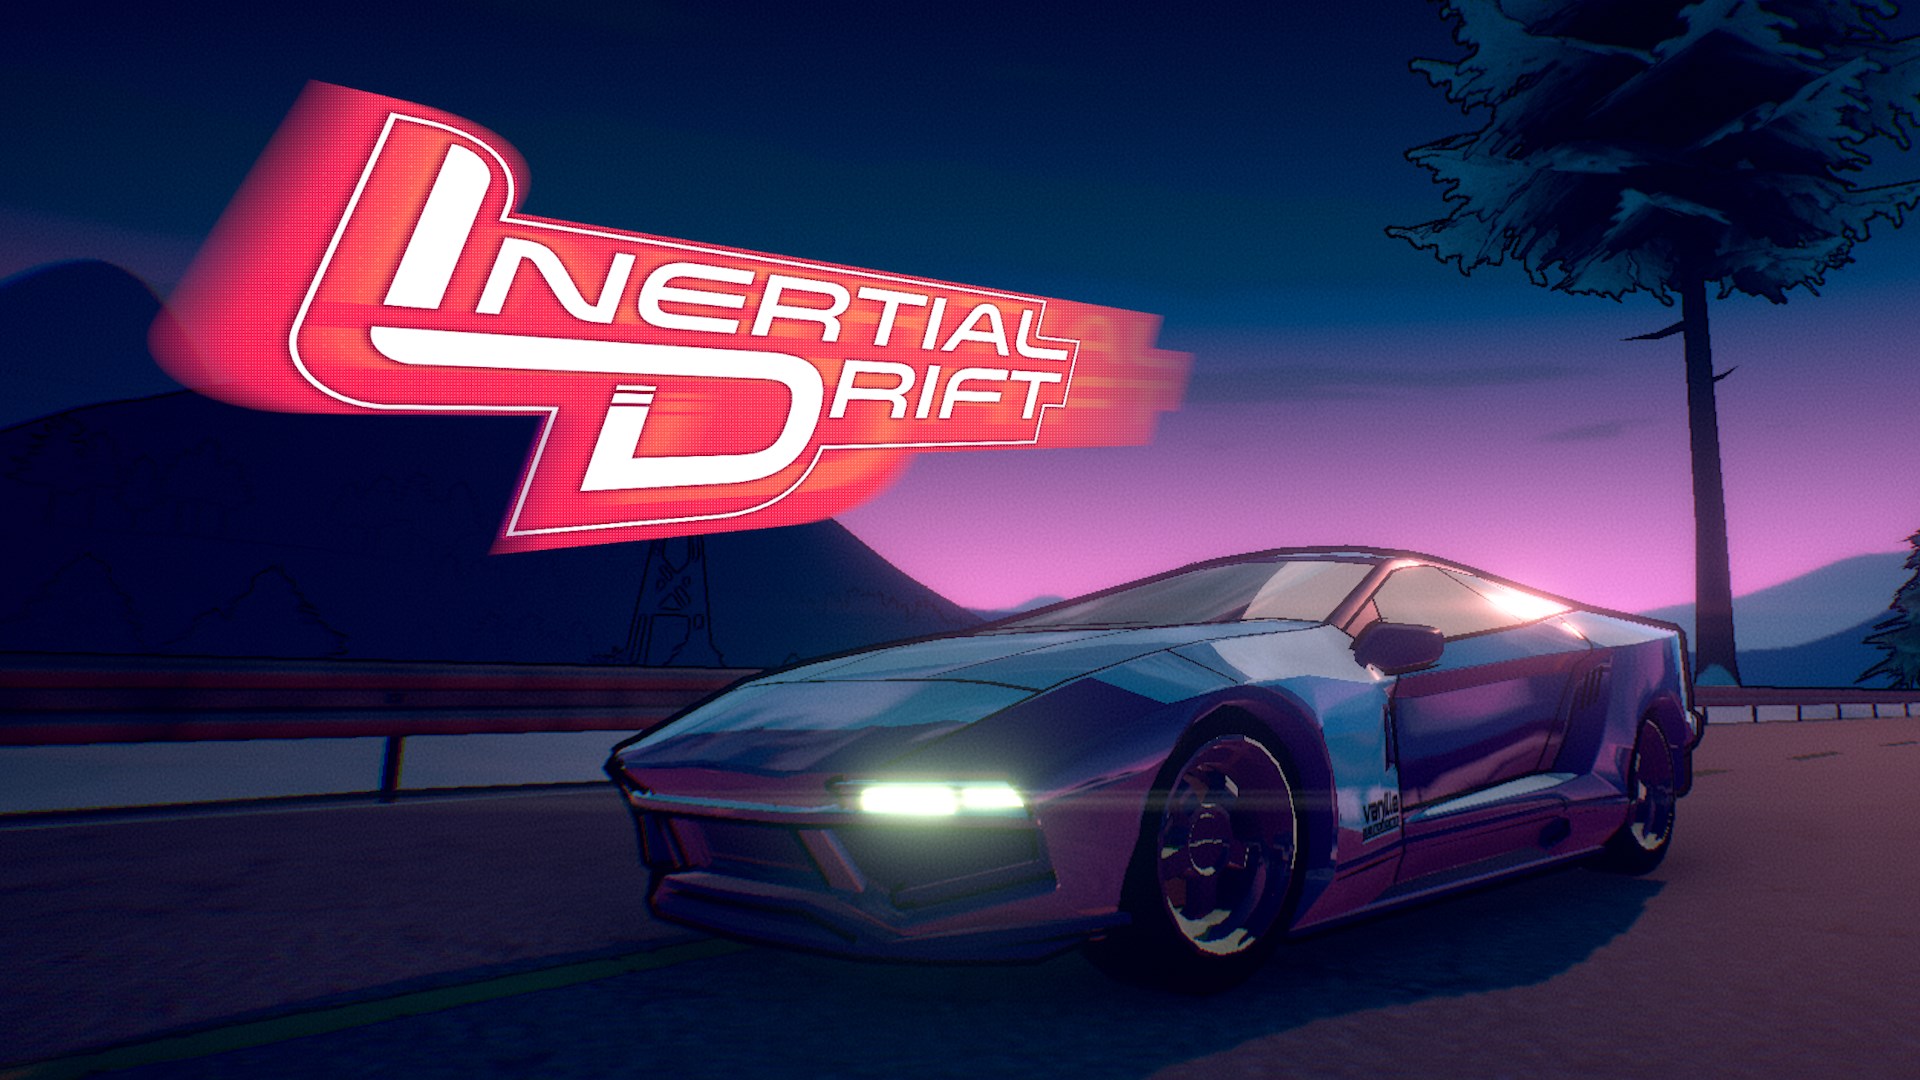 Video For Inertial Drift Is Now Available For Xbox One